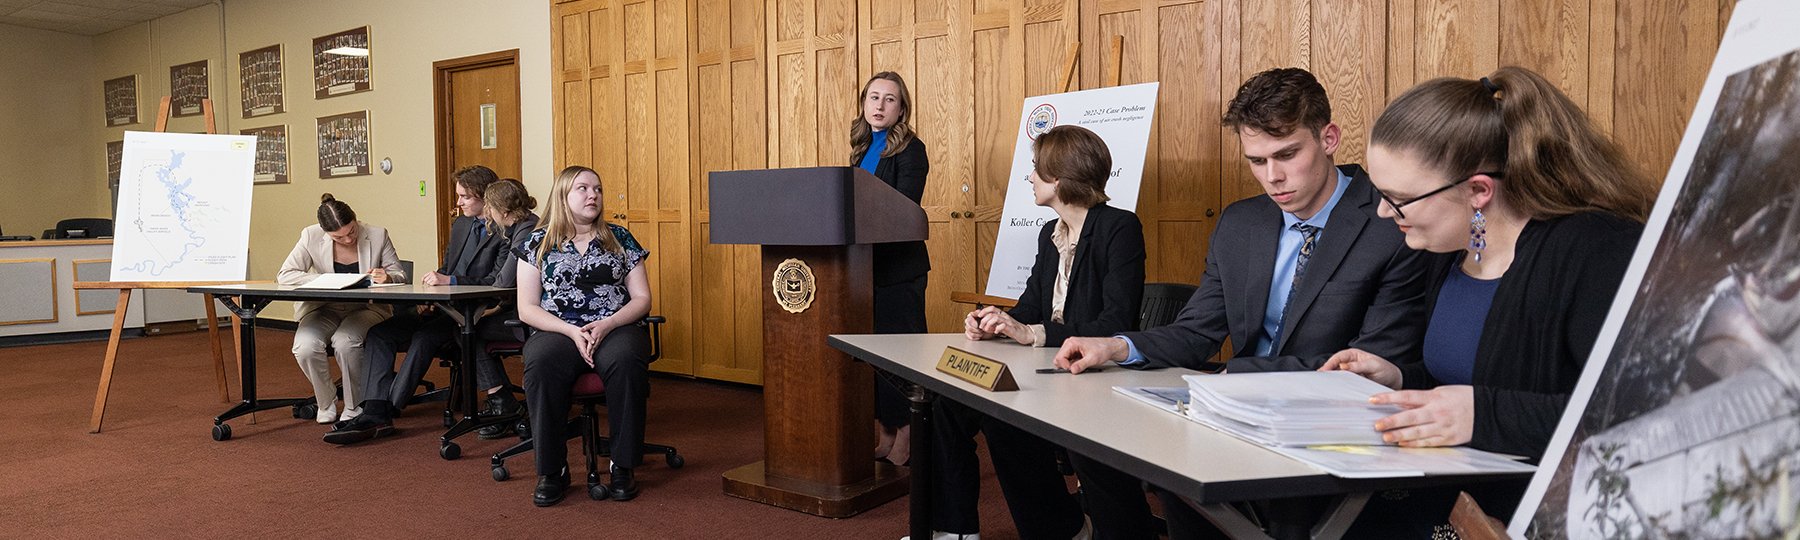 Students question a witness seated next to tables and a podium during a mock trial presentation.